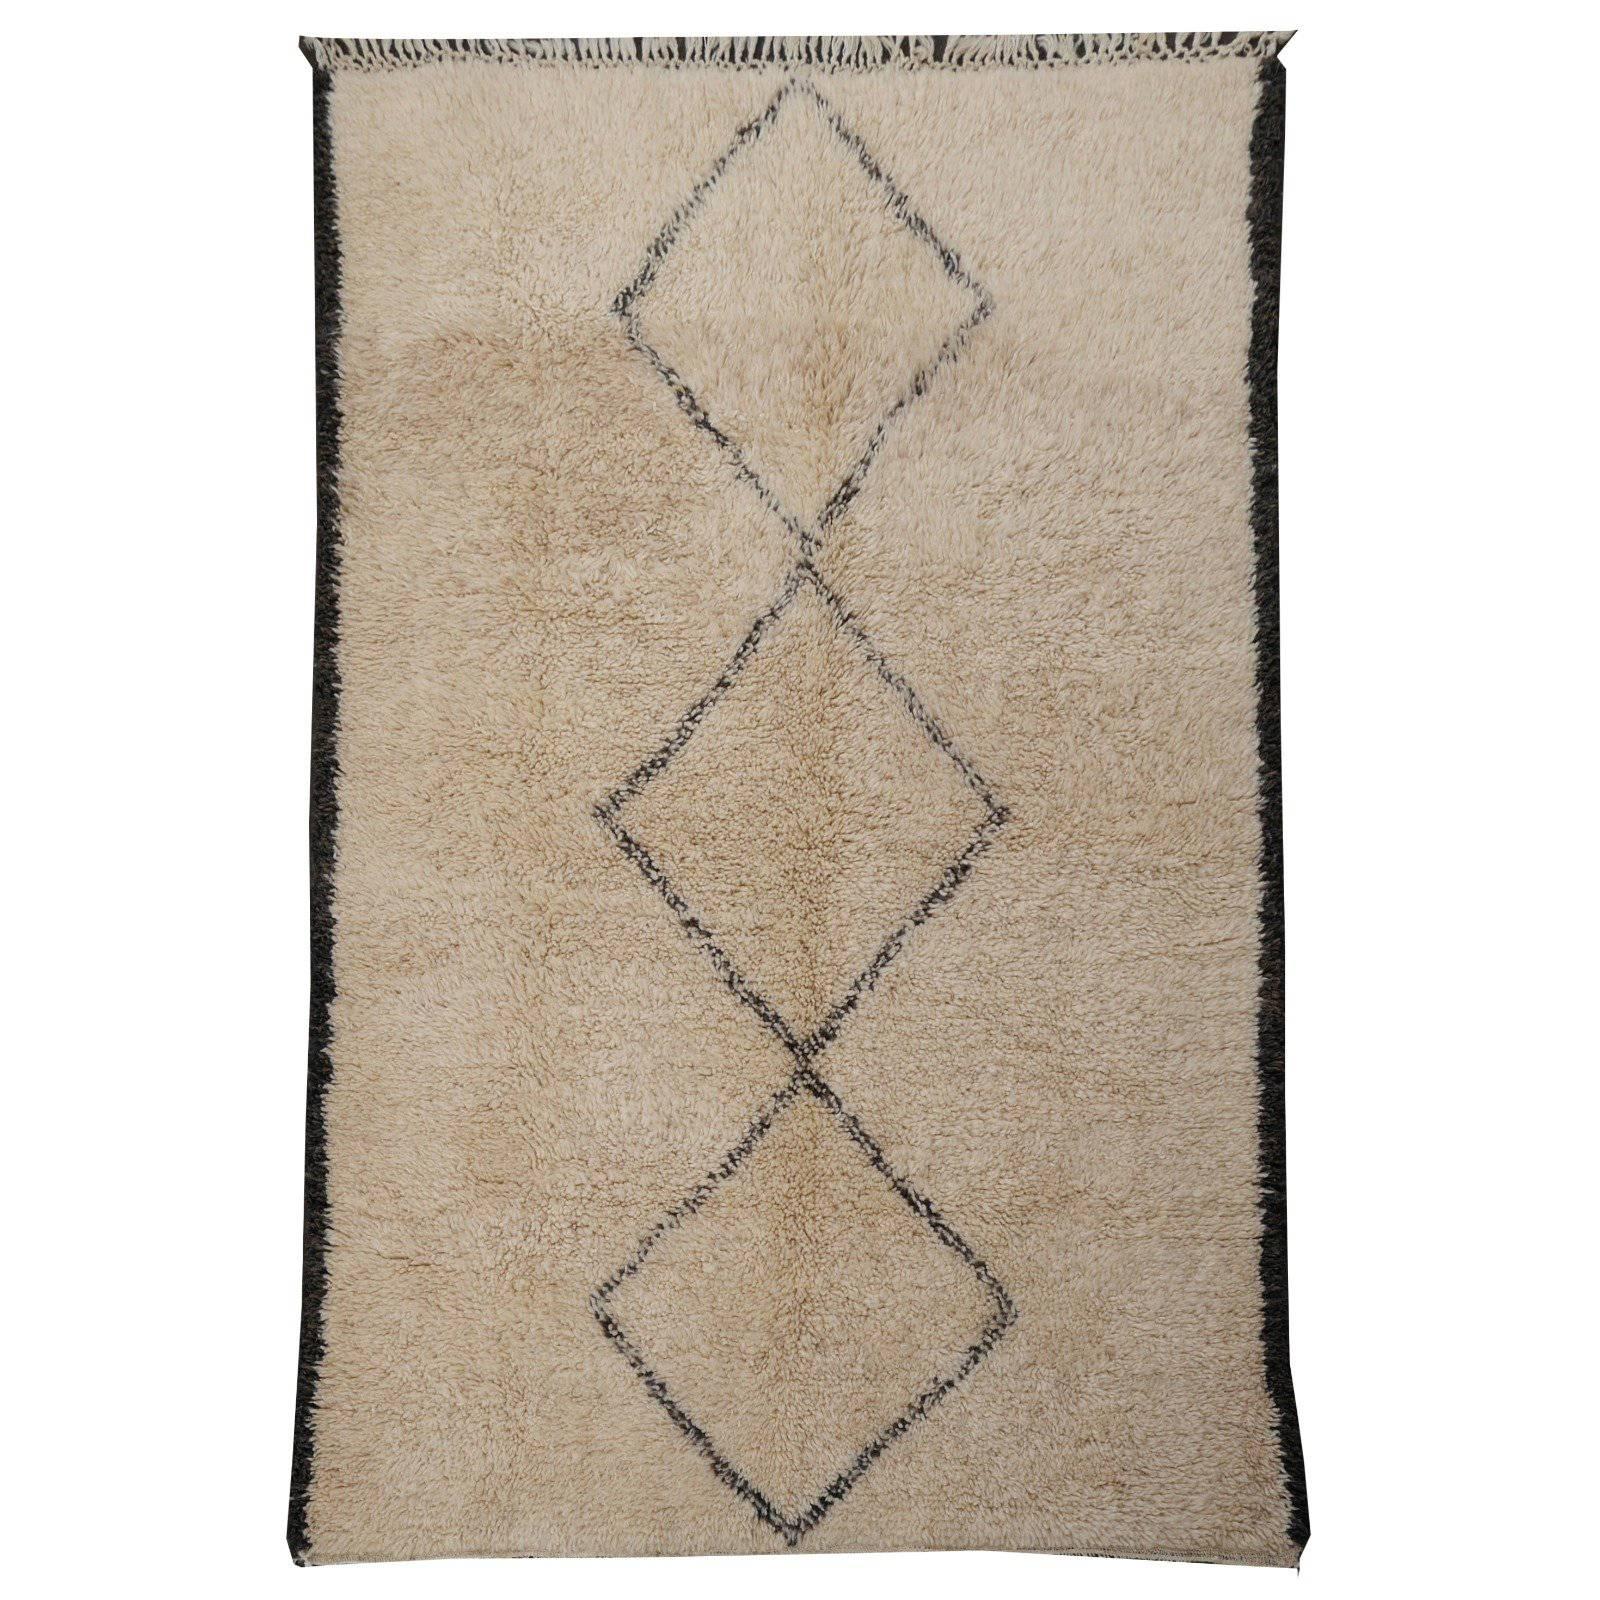 Contemporary North African Moroccan Berber Rug Ivory and Dark Brown